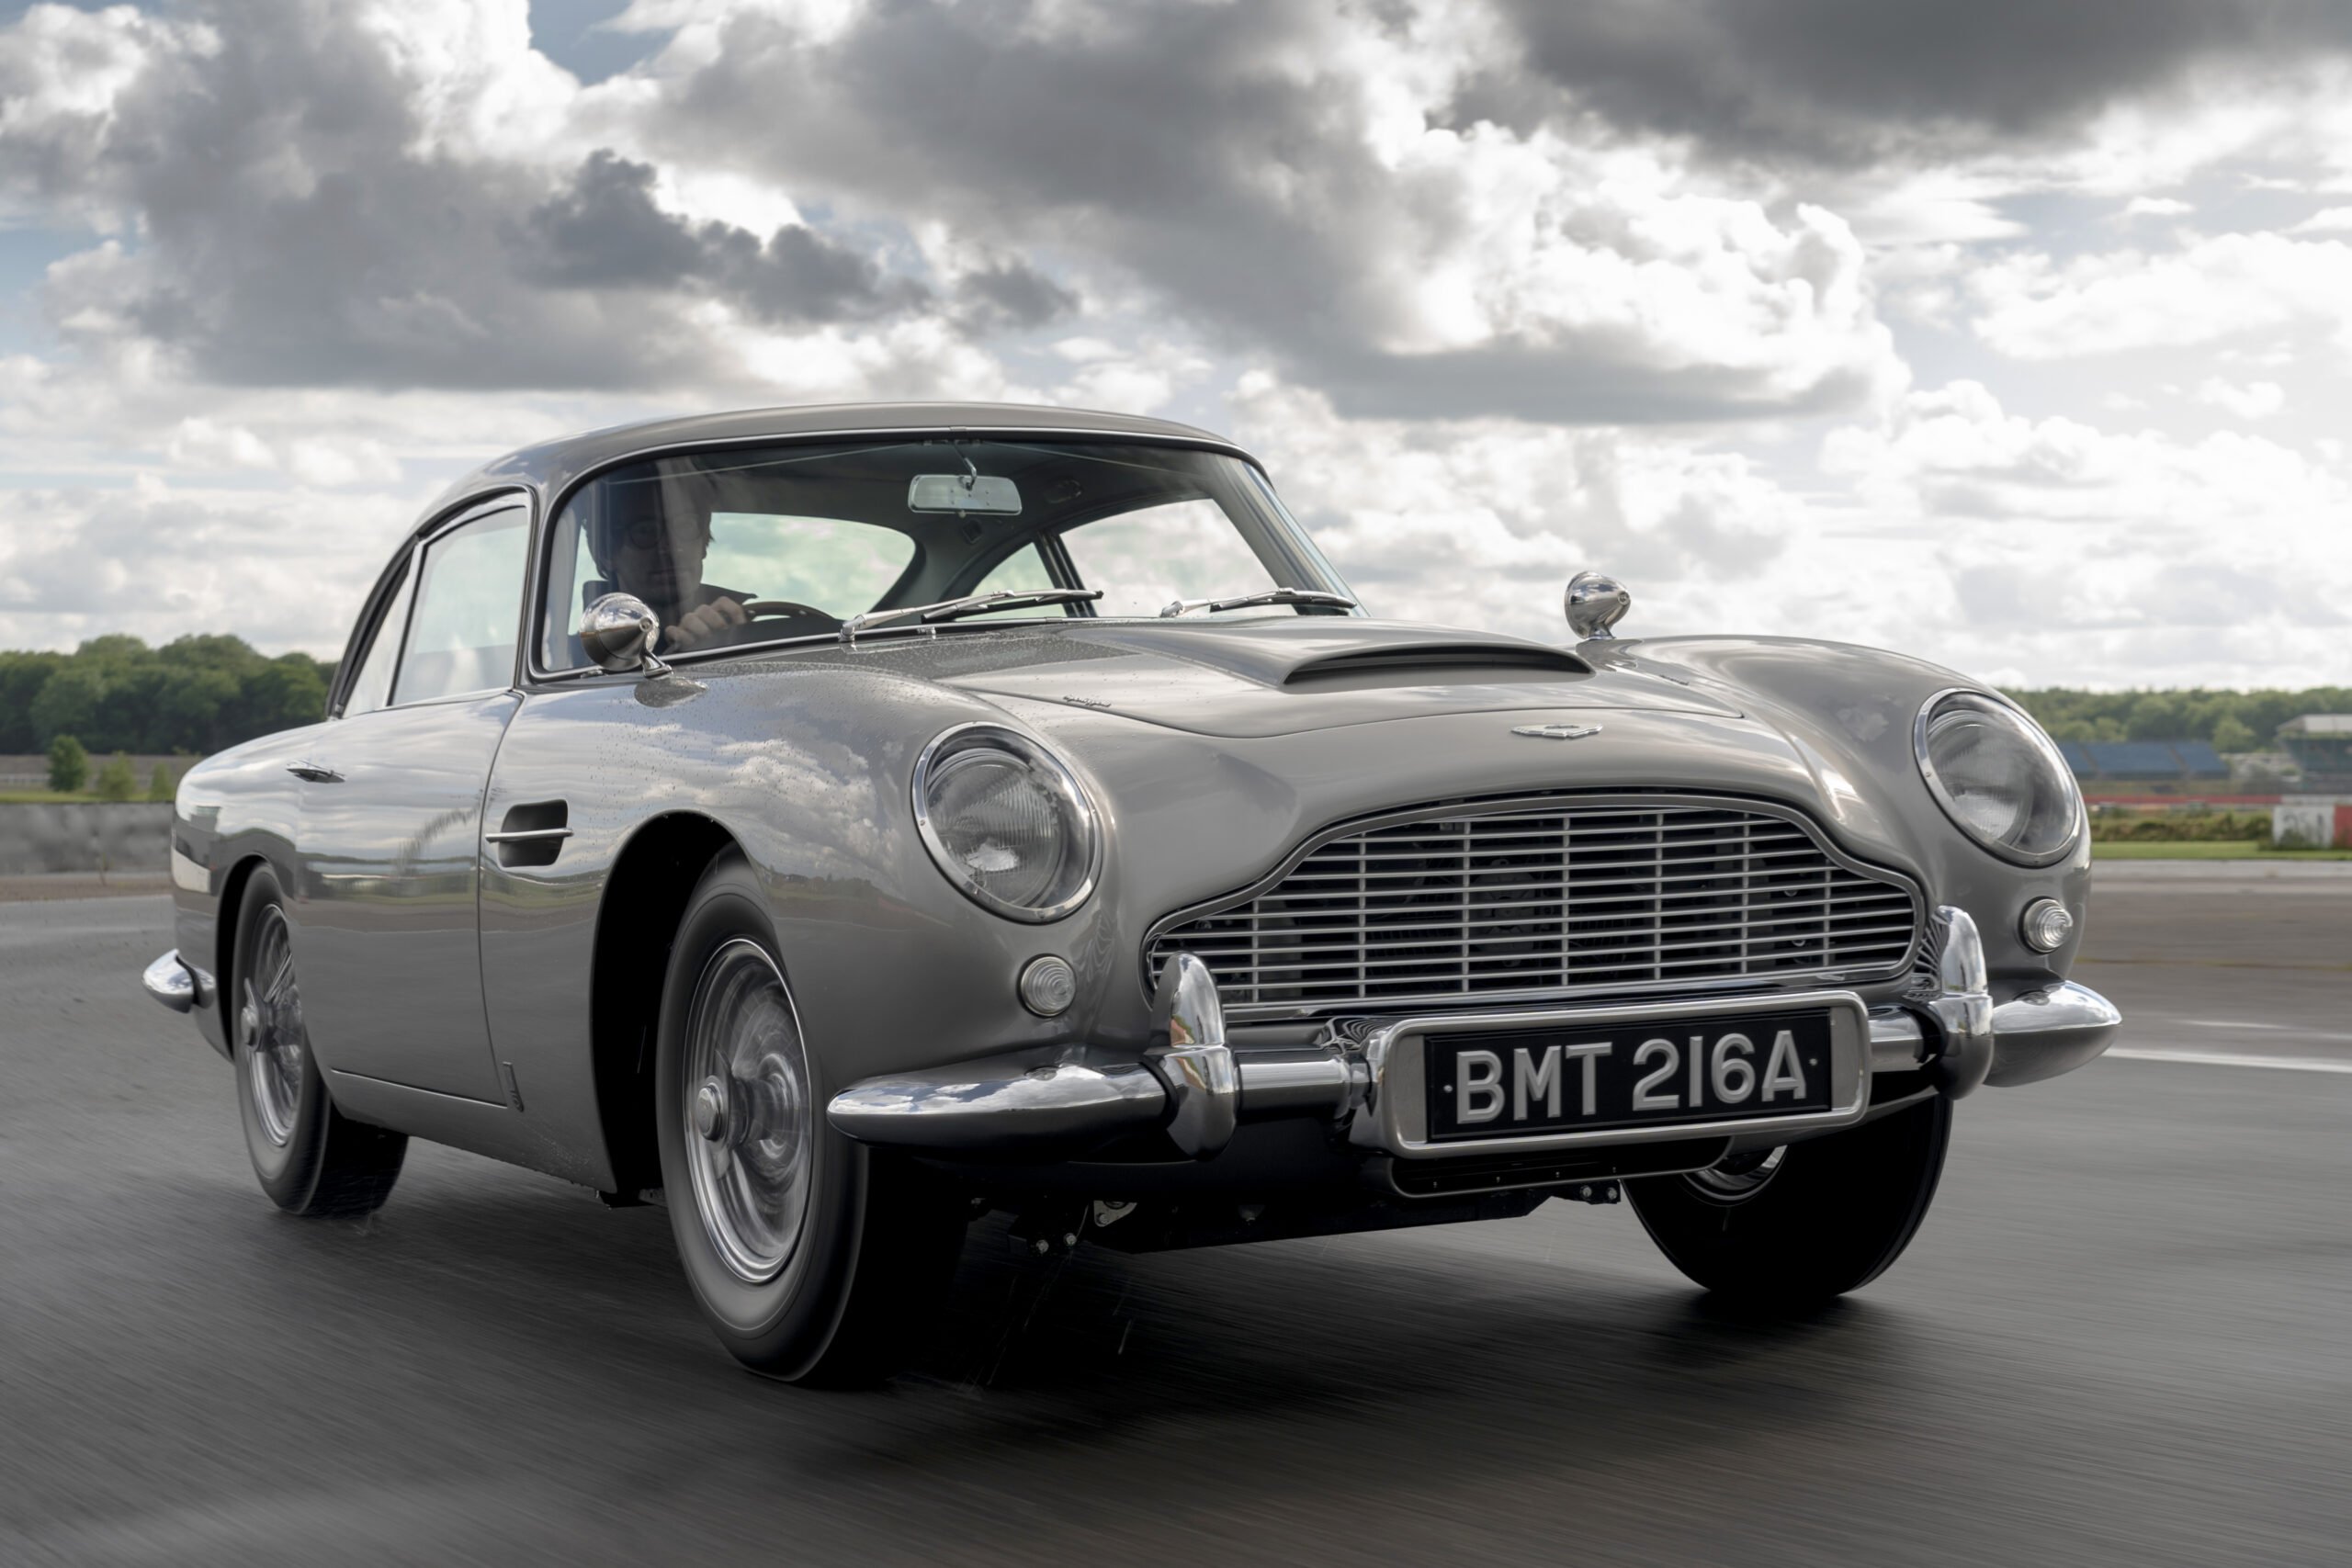 Aston Martin Works gives Owners the chance to future-proof classic cars with new major components